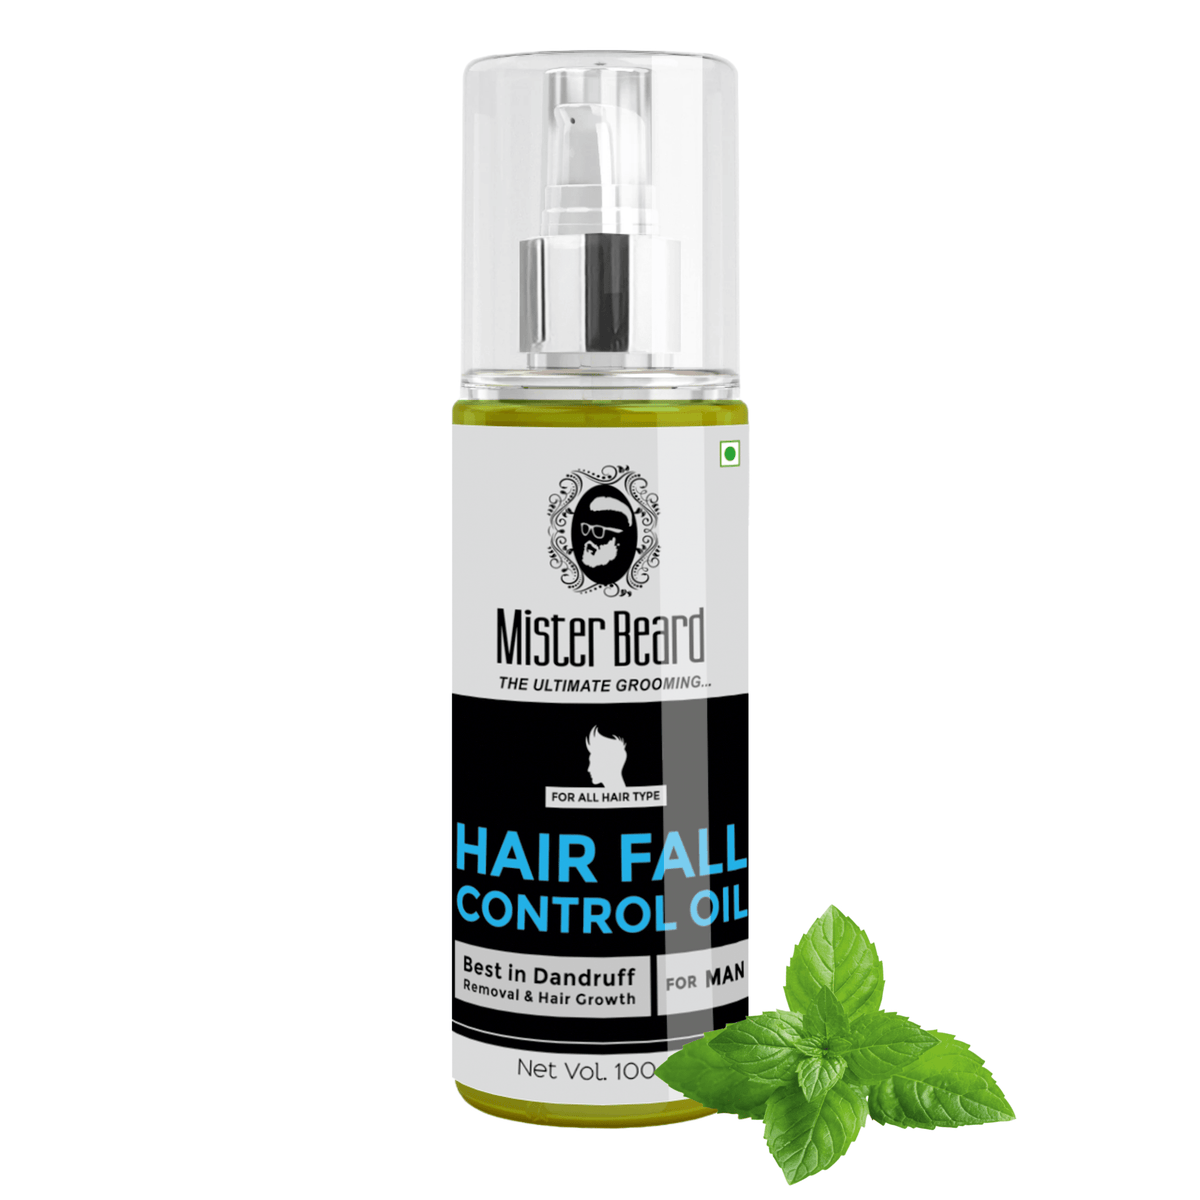 Mister Beard Hair Fall Control Oil|Controls Hair Fall. Nourishes Scalp|Boosts Hair Growth, Contains Ginger, Rosemary, Thuja Extracts|Non-Sticky Formula,Suitable for Men & Women,100ml - Pink Root